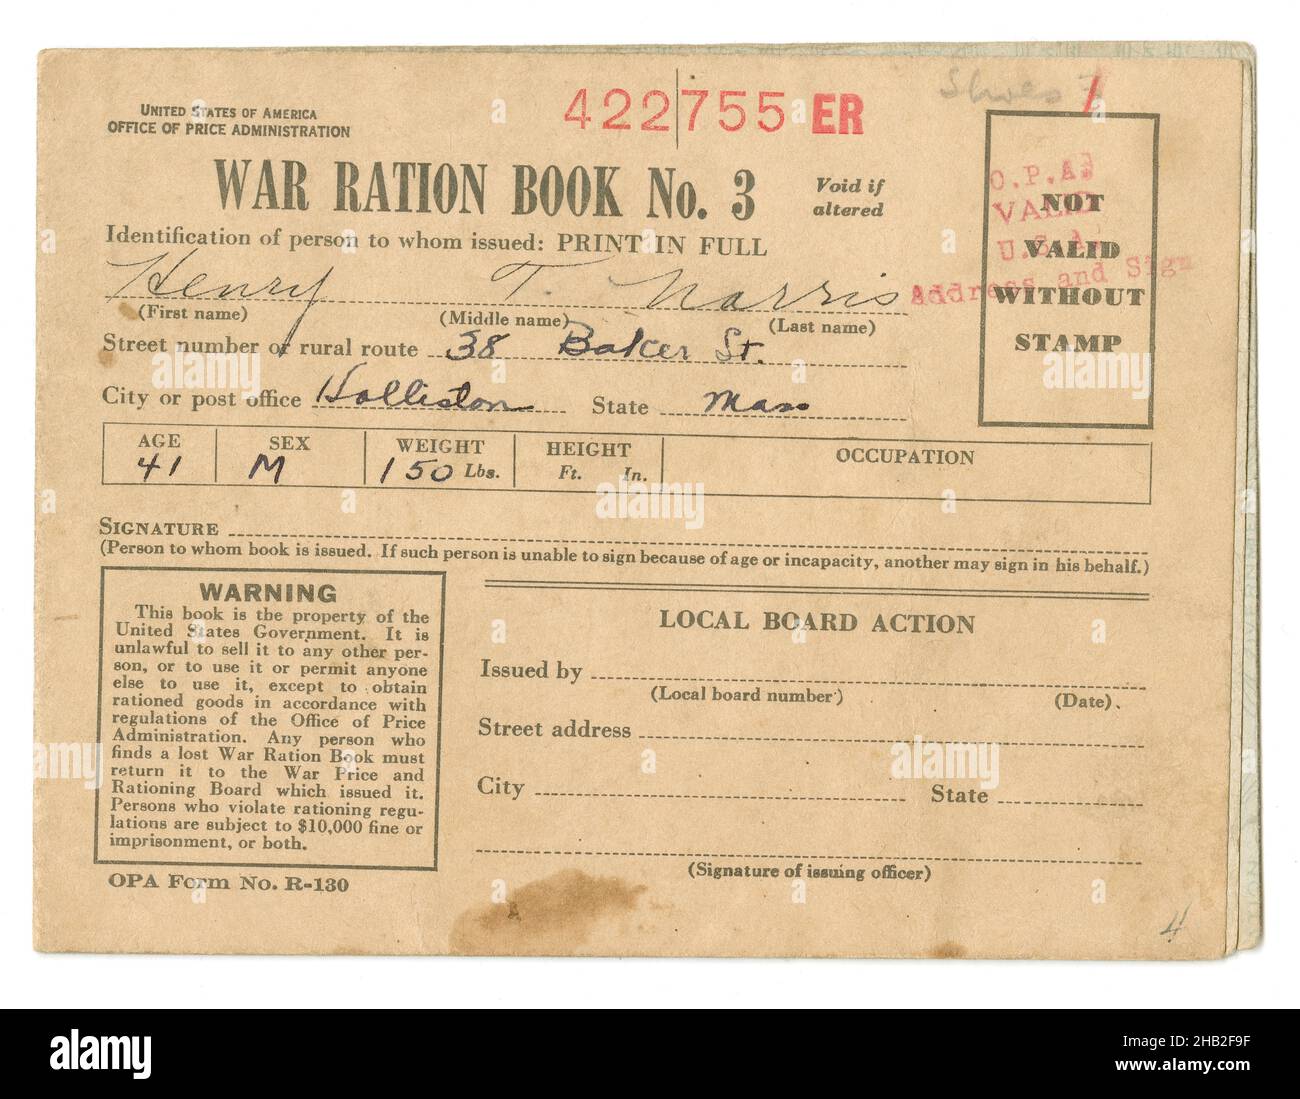 Antique 1943 War Ration Book No. 3, form R-130 from the Office of Price Administration of the United States government. SOURCE: ORIGINAL BOOK Stock Photo